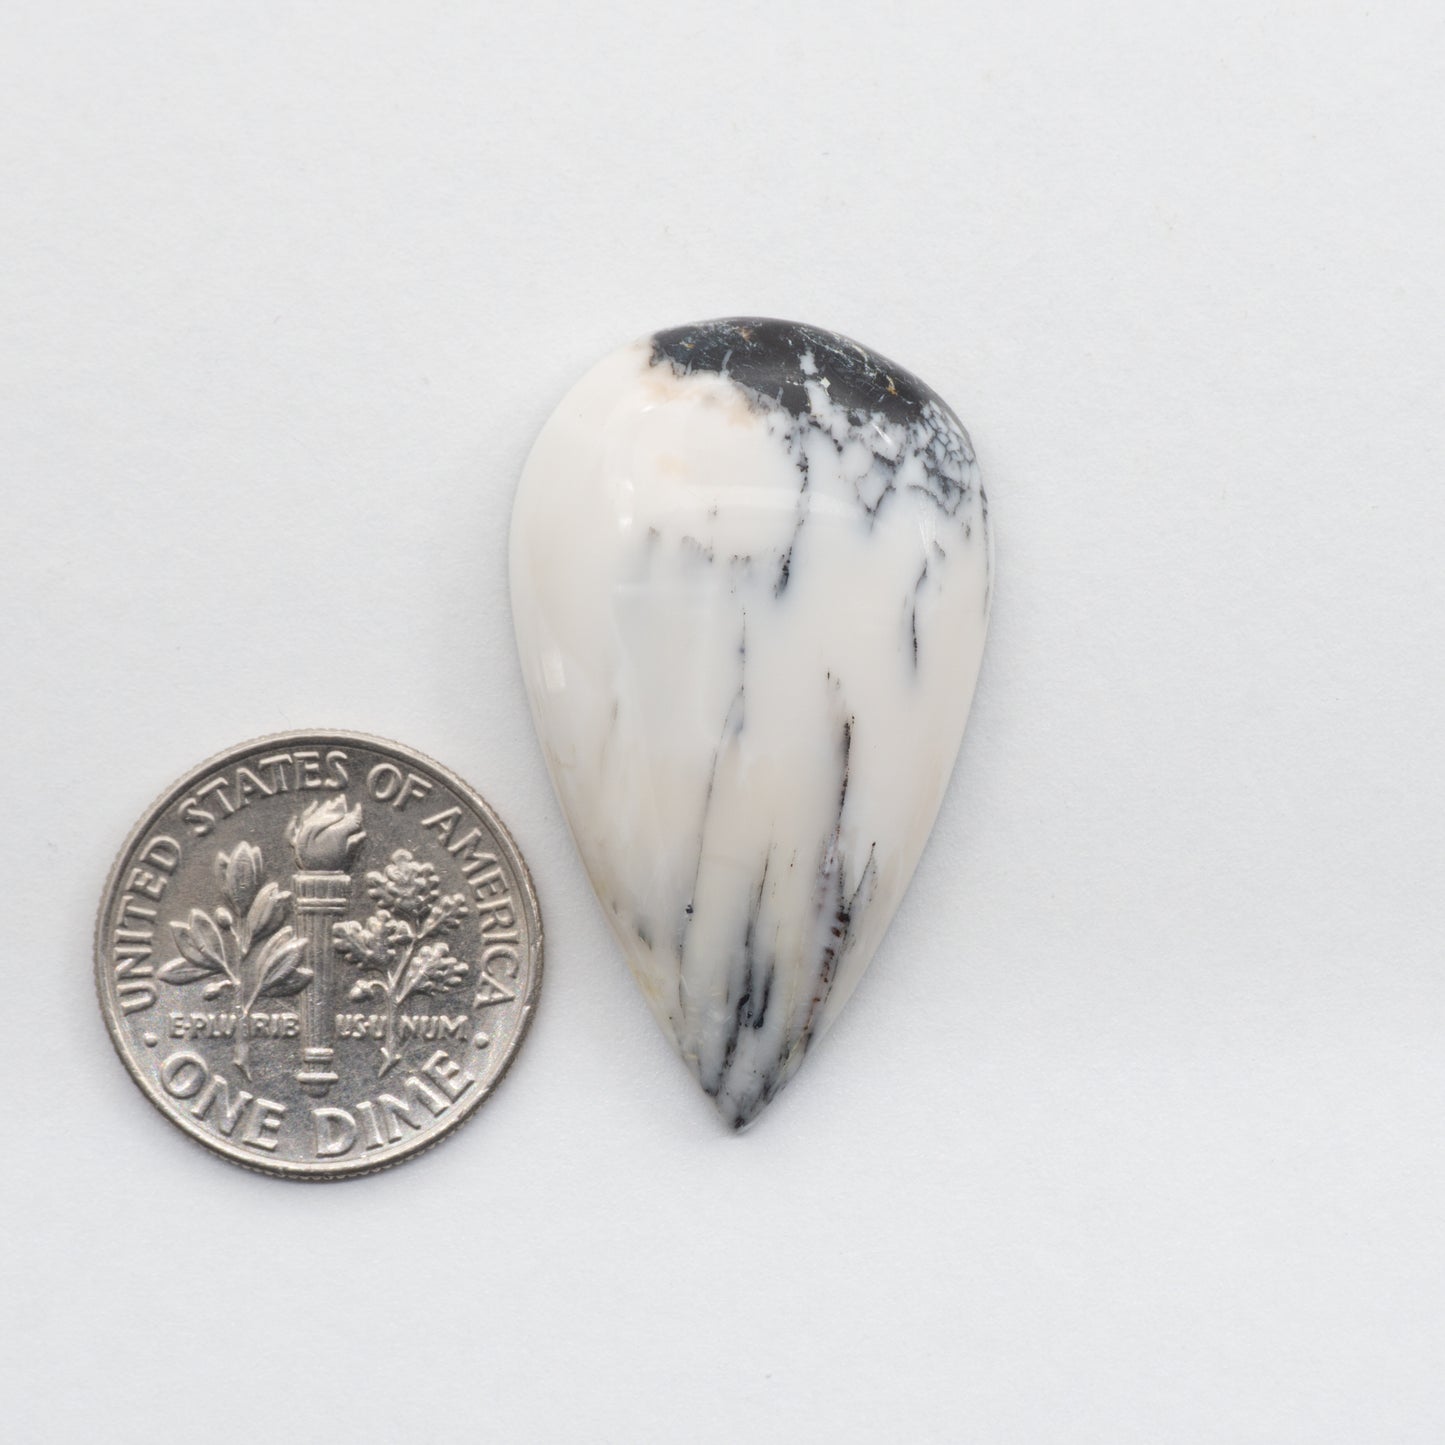 These Natural White Buffalo Cabochons have a glossy finish and are backed for added strength. Mined in Nevada, USA these stones are similar to turquoise used for jewelry making.